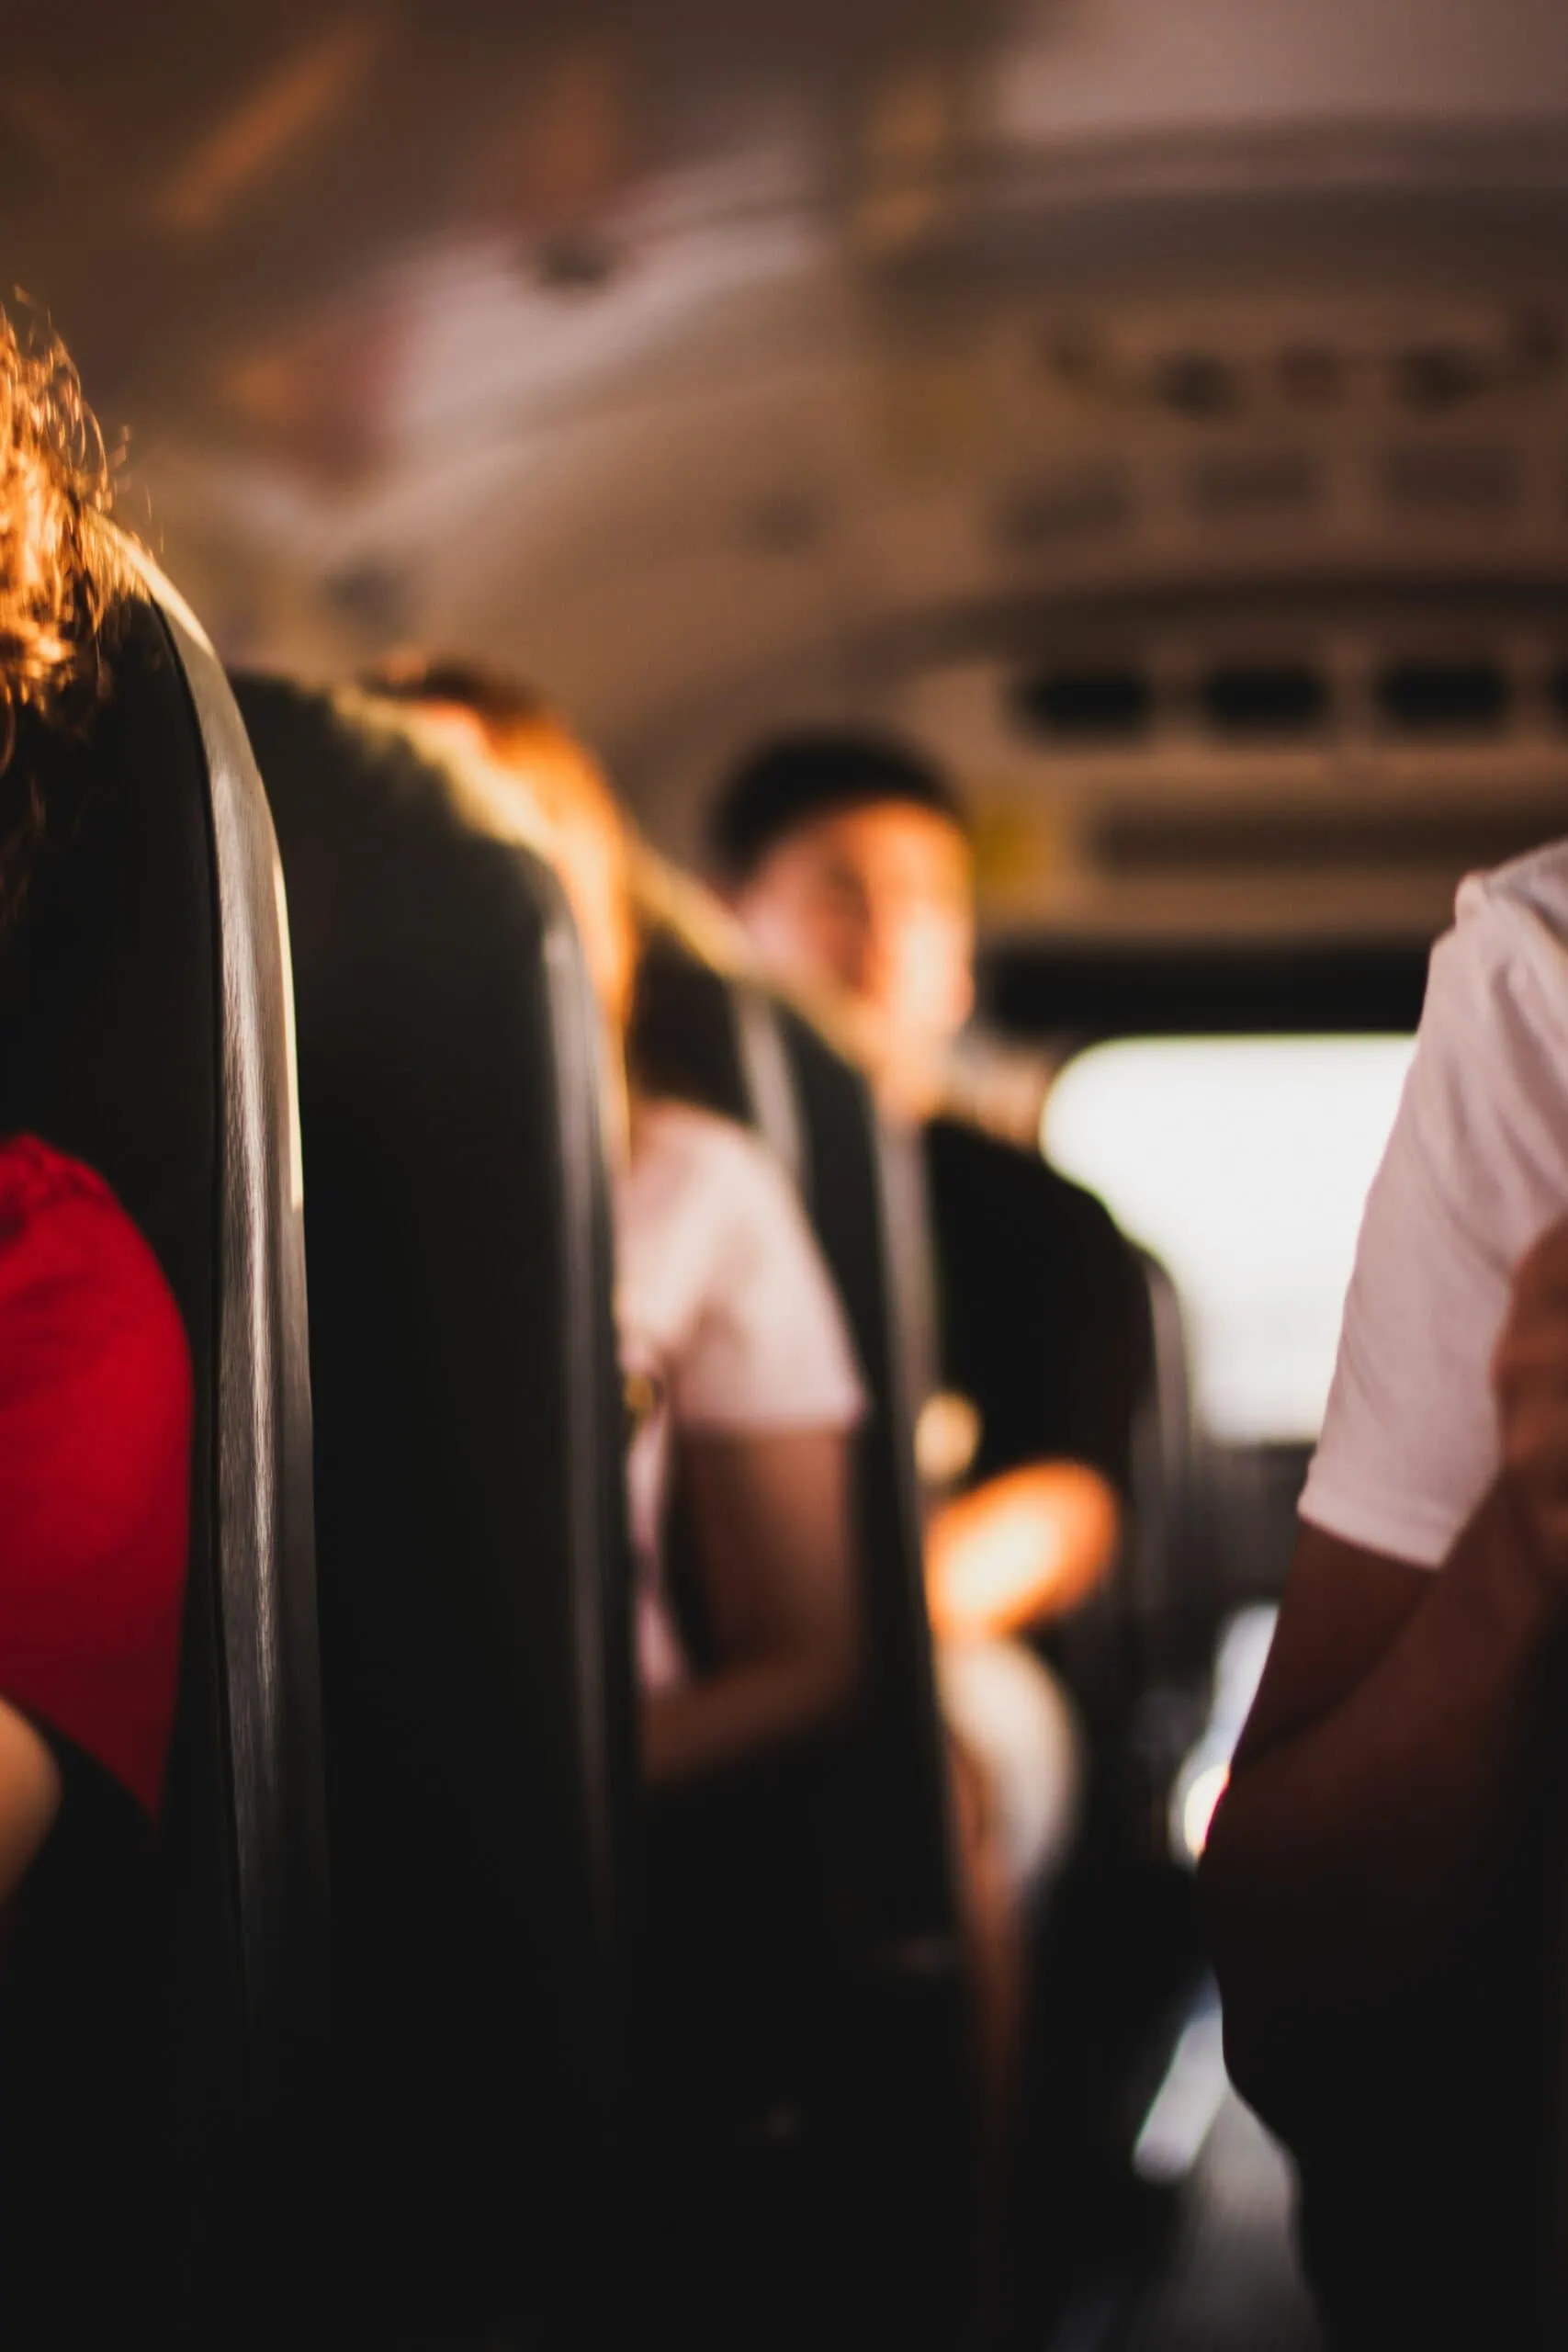 Students in a school bus protected by GPS tracking systems